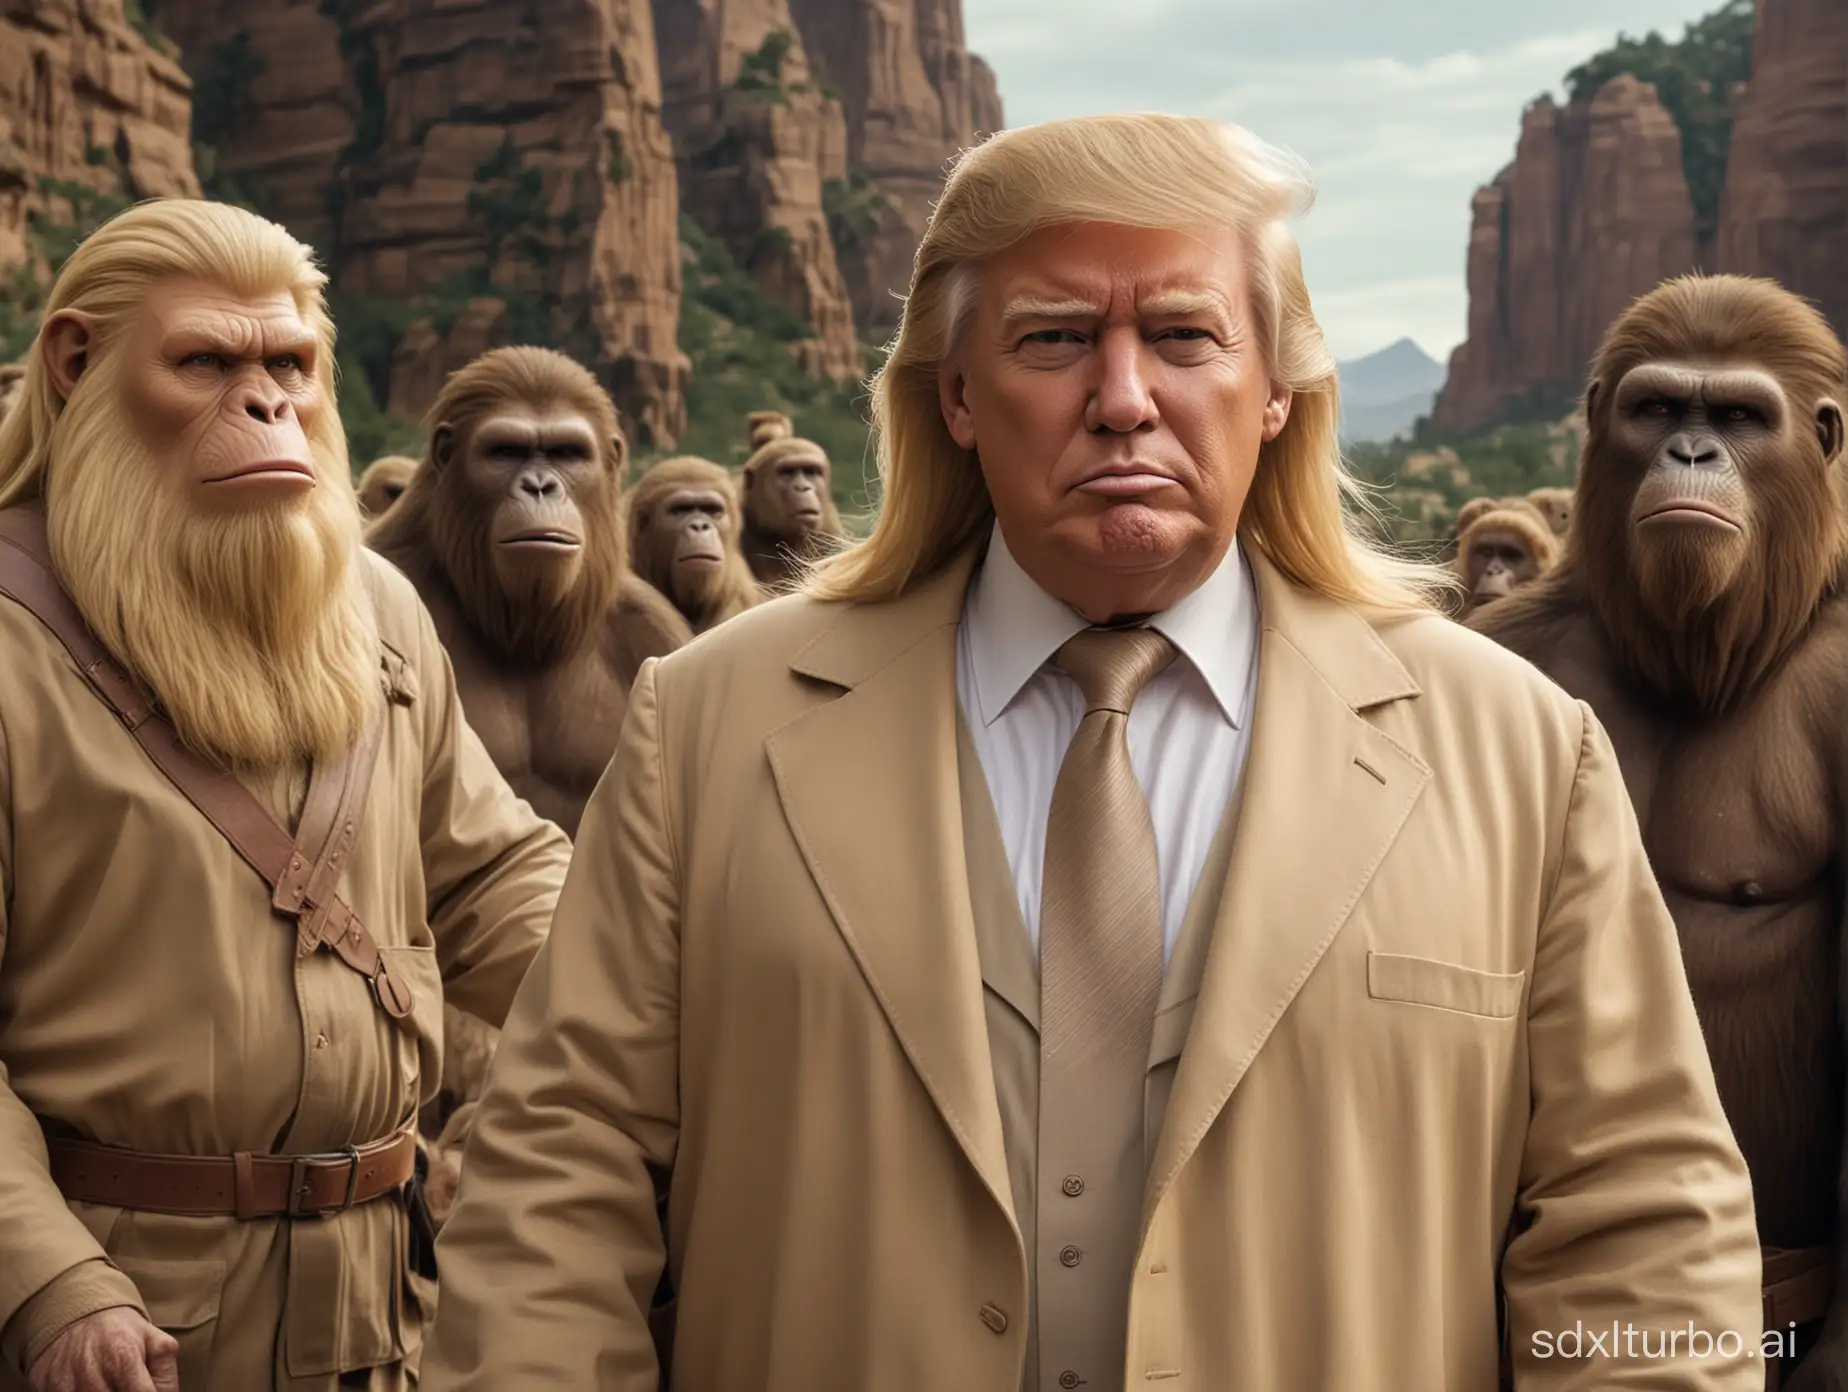 Donald-Trump-in-Doctor-Zaius-Costume-Realistic-Portrait-Inspired-by-Planet-of-The-Apes